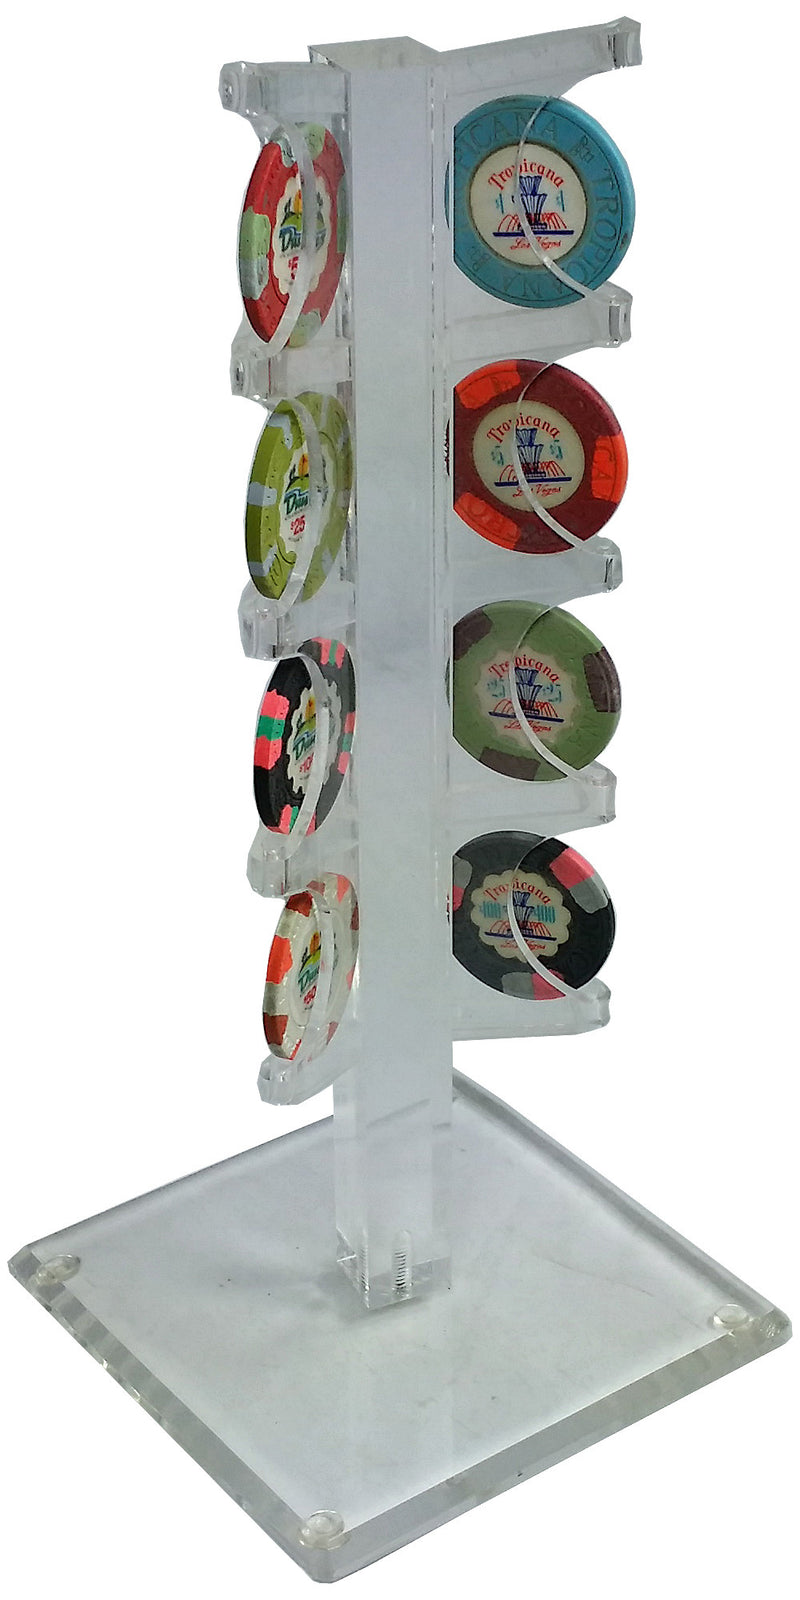 Chip Display Acrylic Tree for 8 Poker Chips - Spinettis Gaming - 1